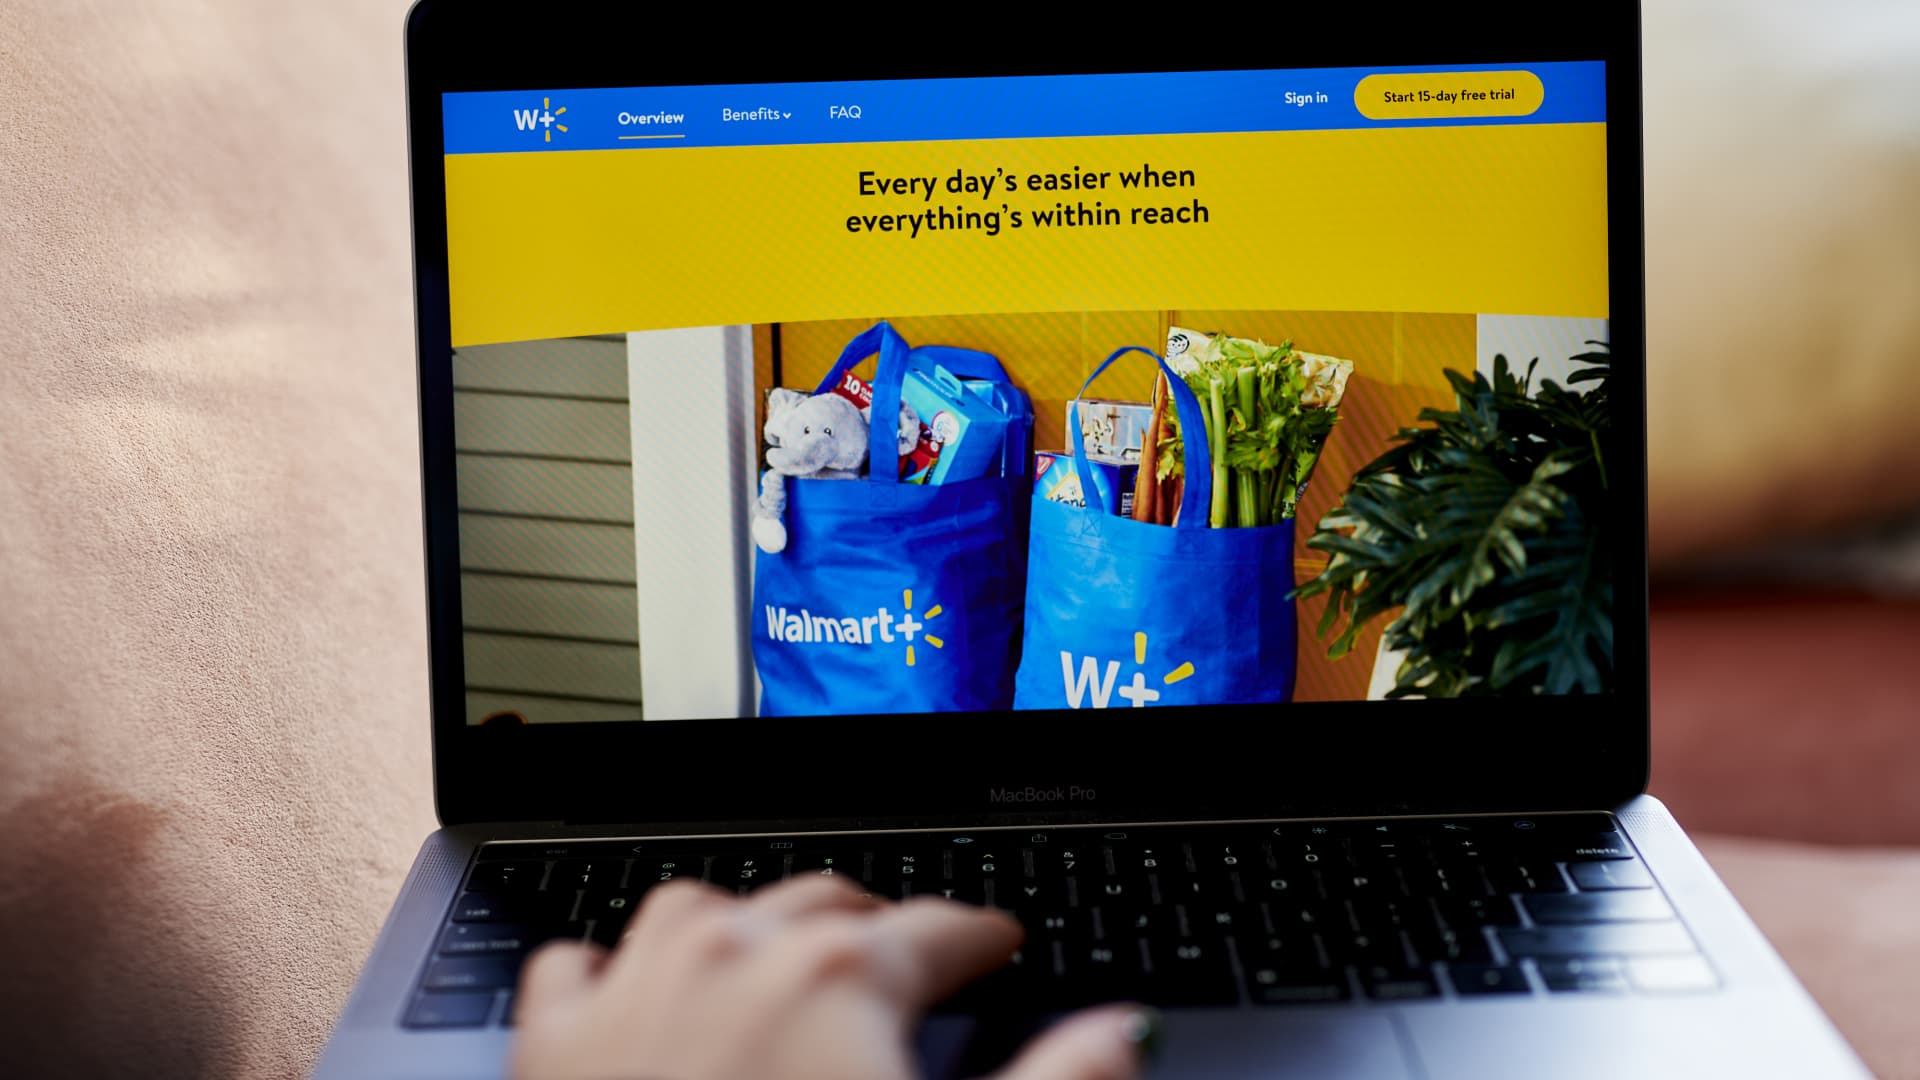 Walmart dangles deeper gas discounts to attract and retain members of subscription service – CNBC